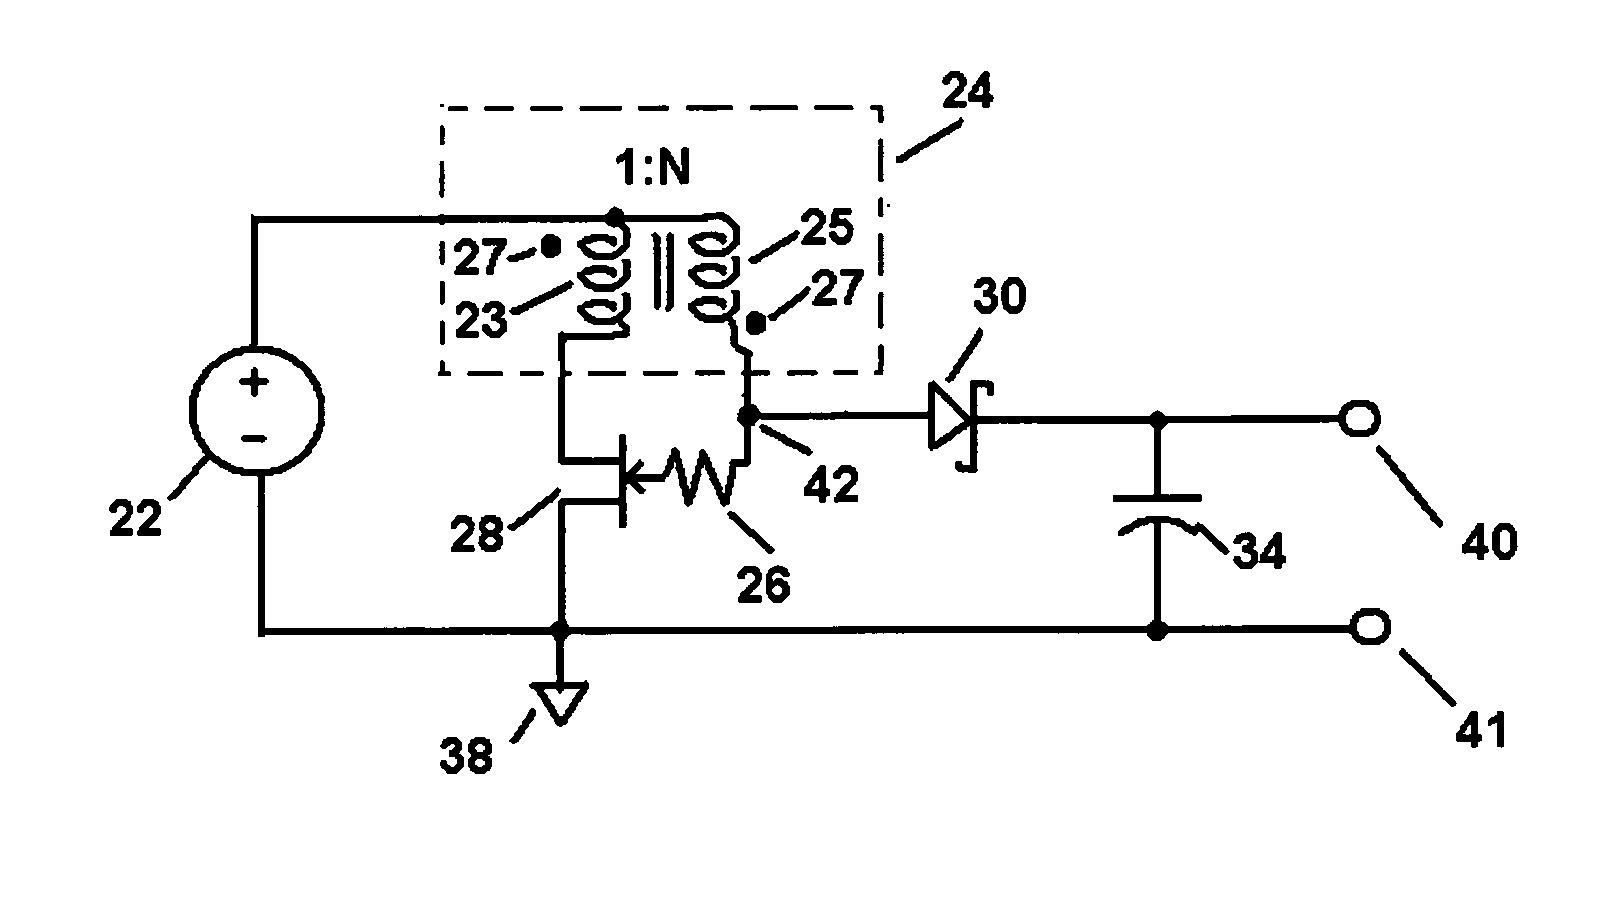 Ultra-low voltage boost circuit